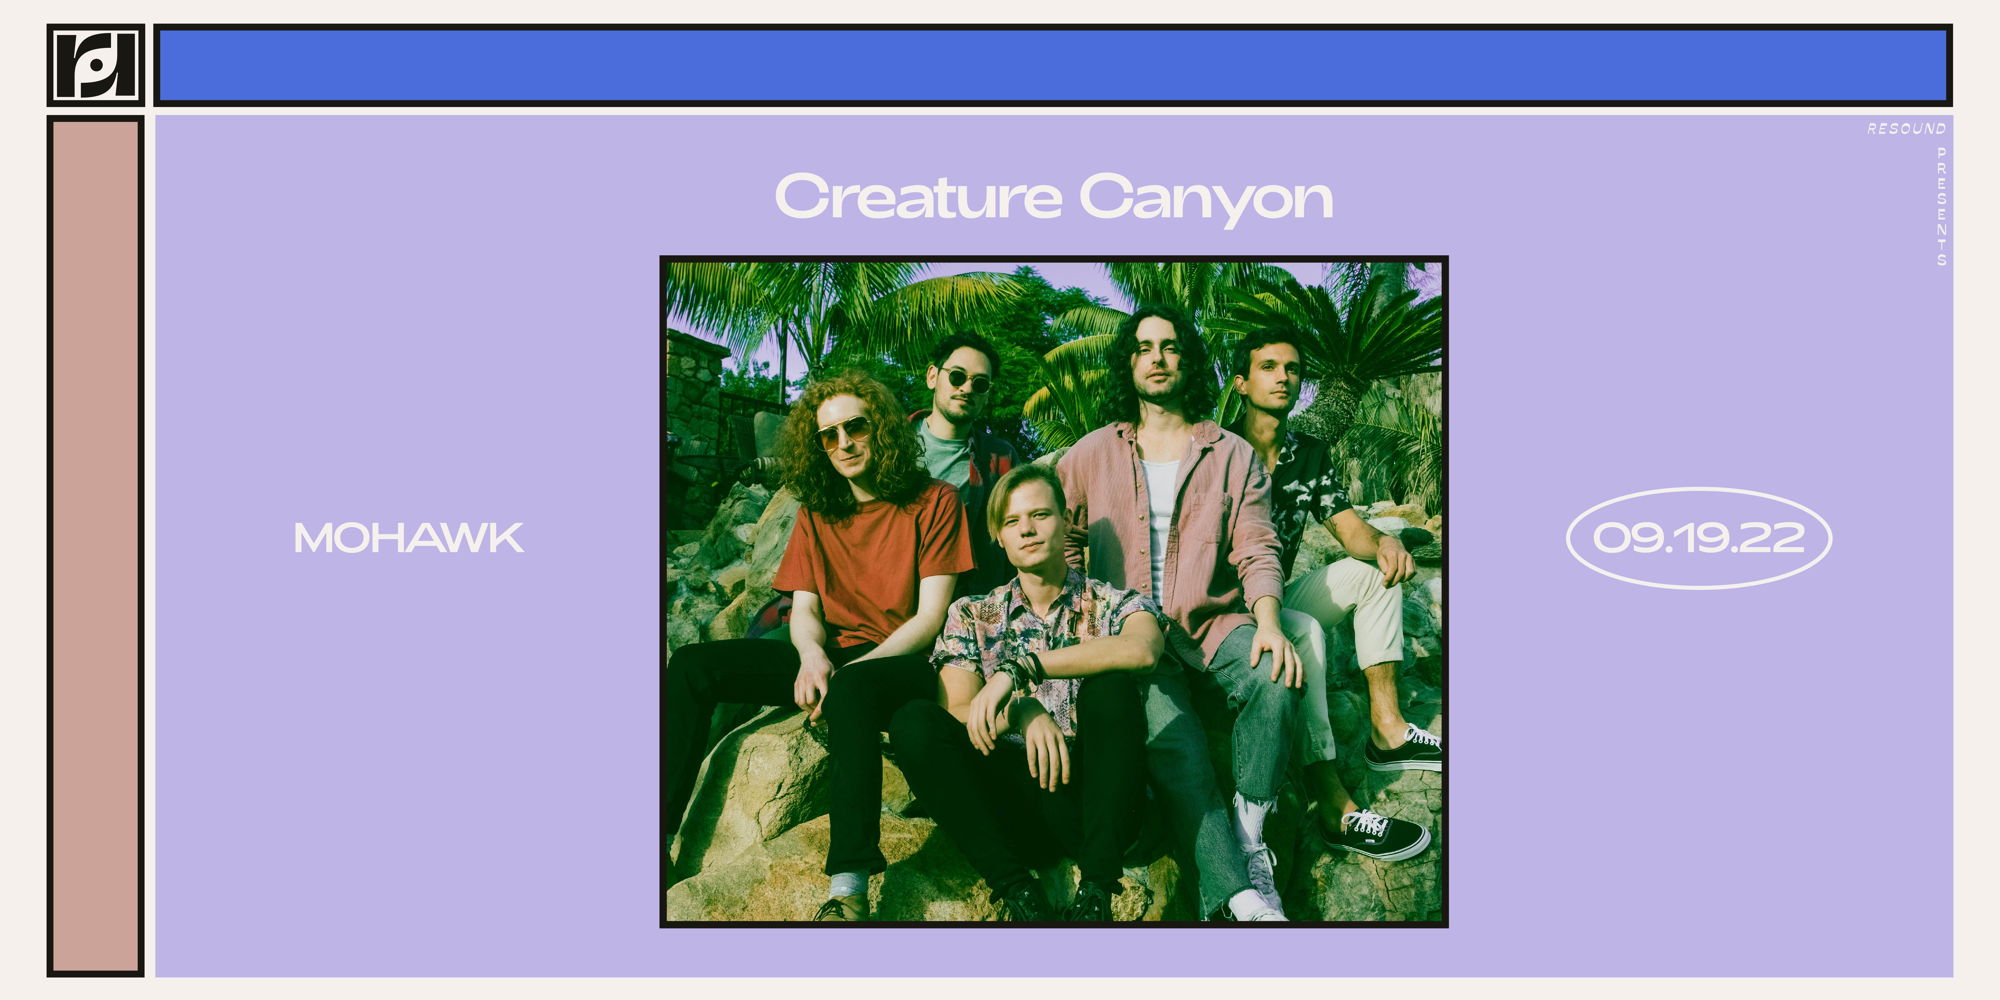 Resound Presents: Creature Canyon at Mohawk on 9/19 promotional image